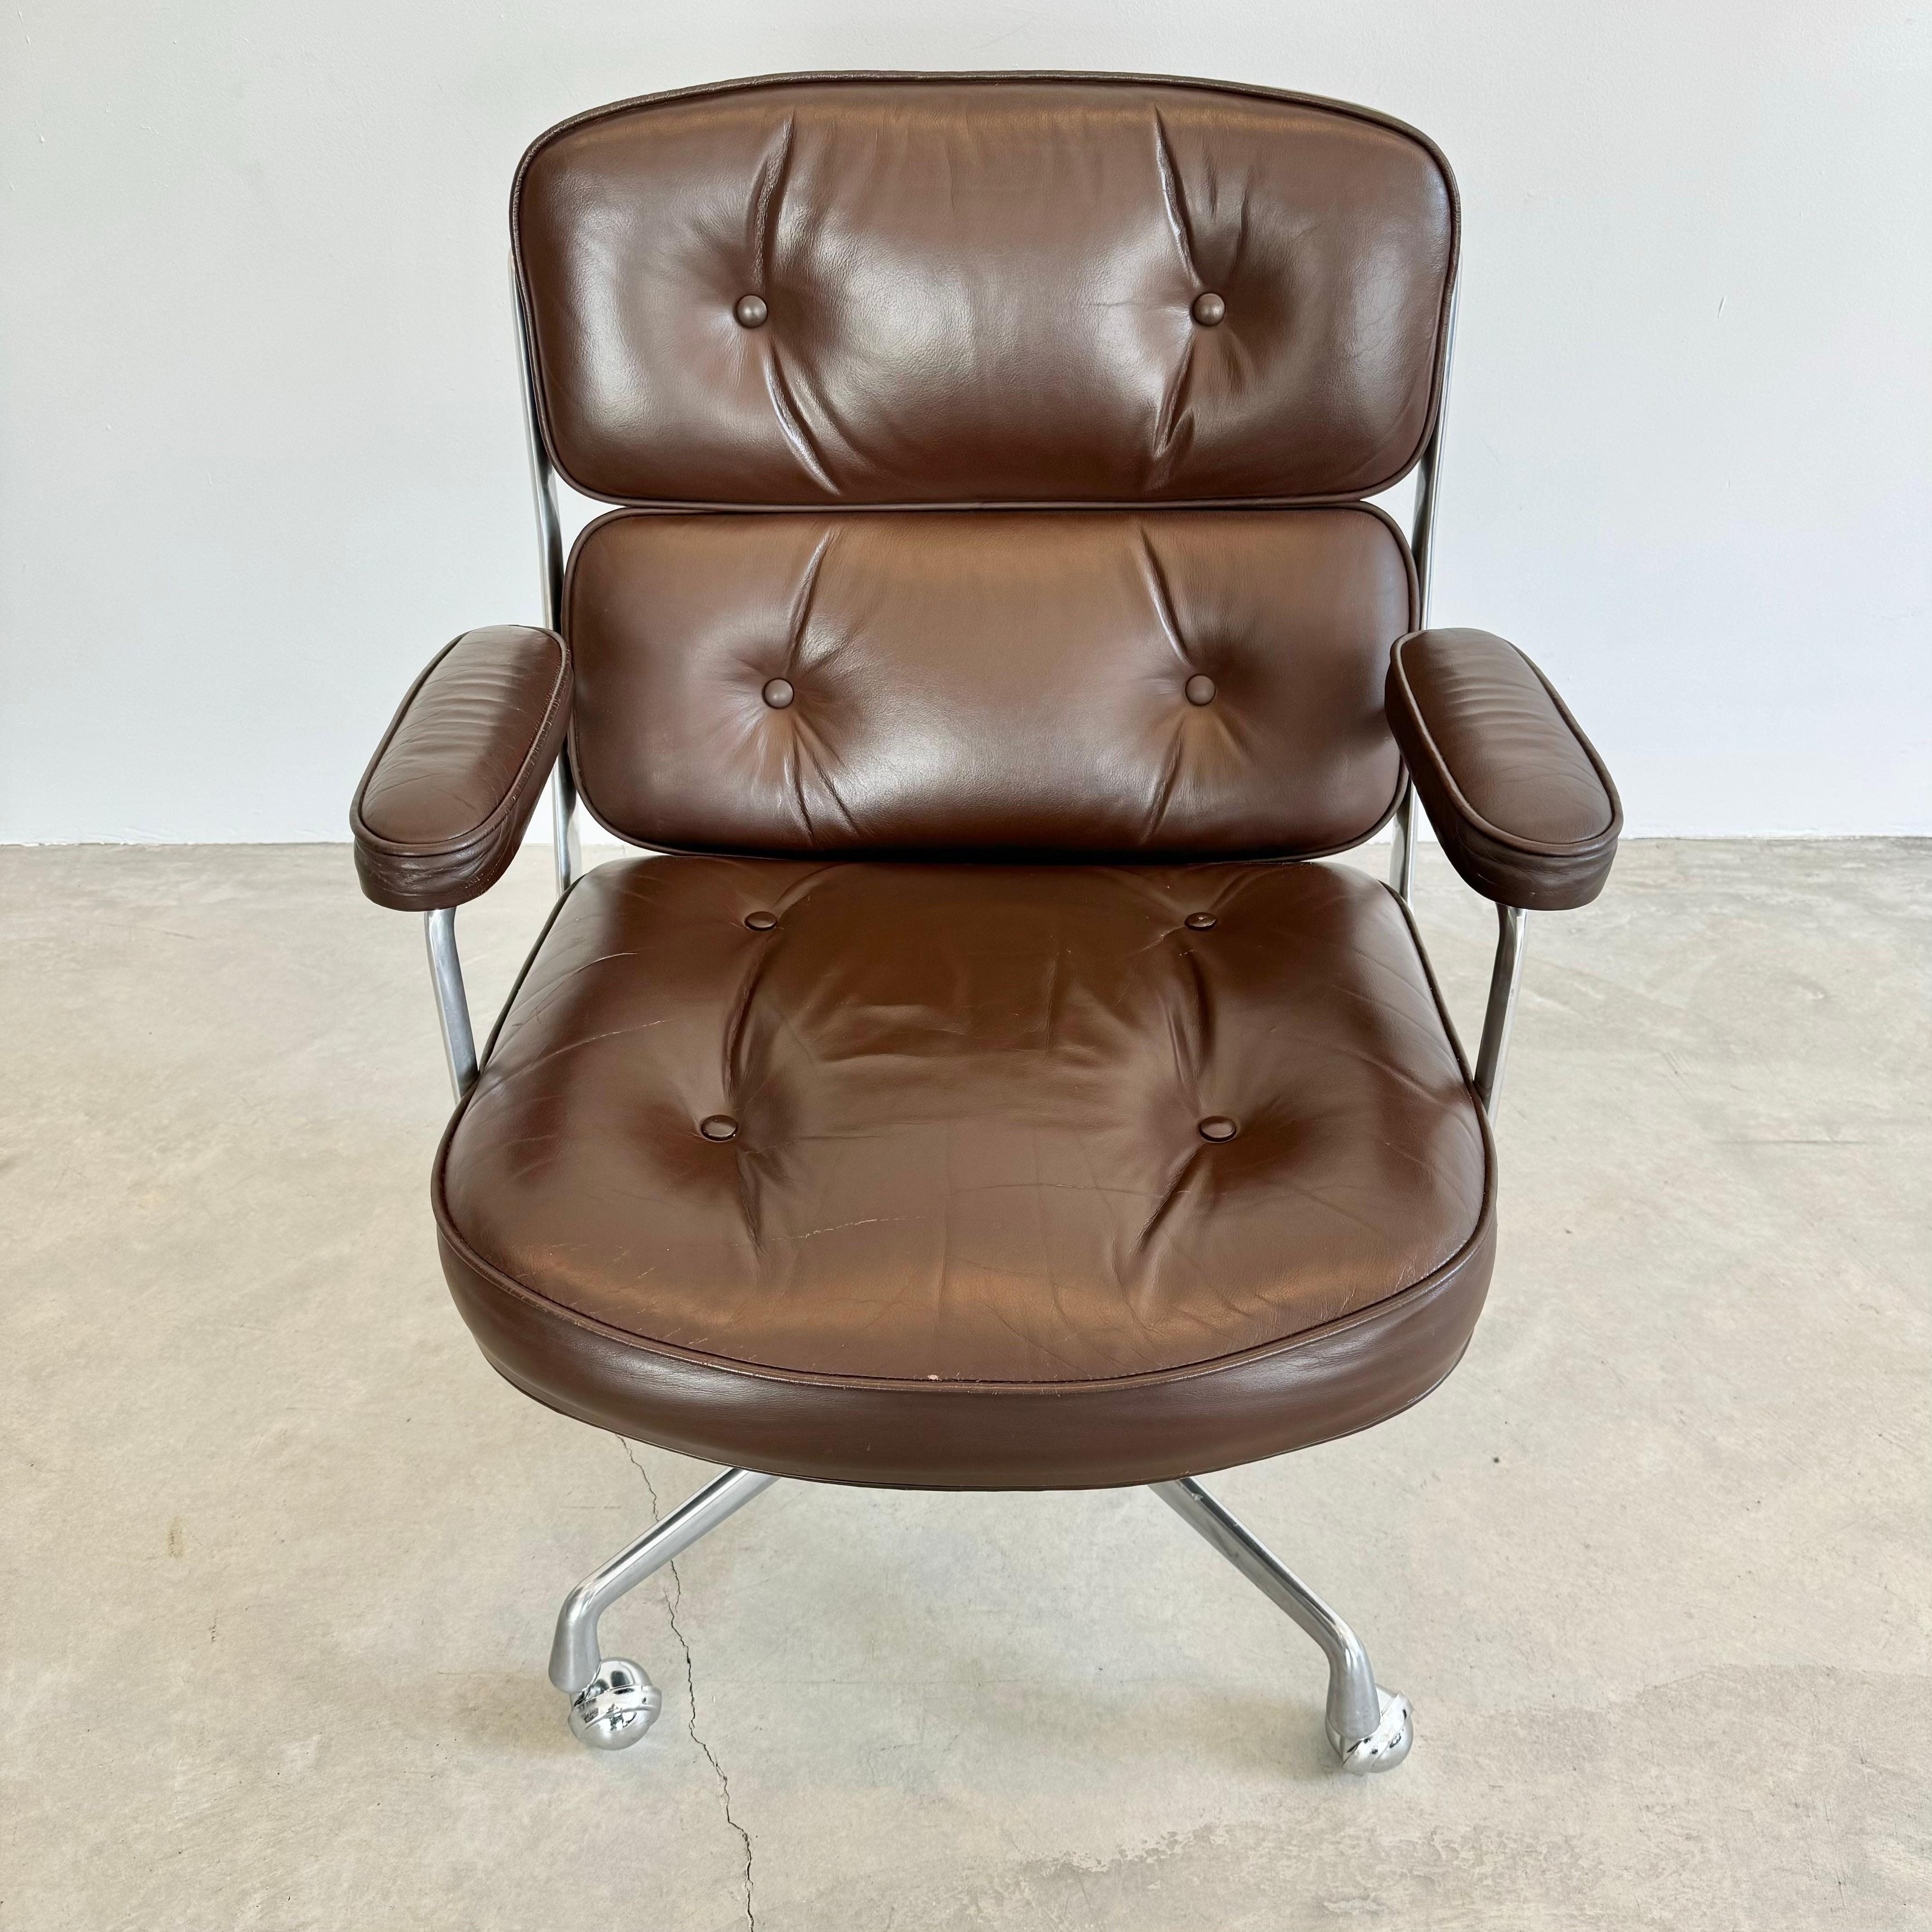 Eames Time Life Chair in Chocolate Leather for Herman Miller, 1978 USA For Sale 5